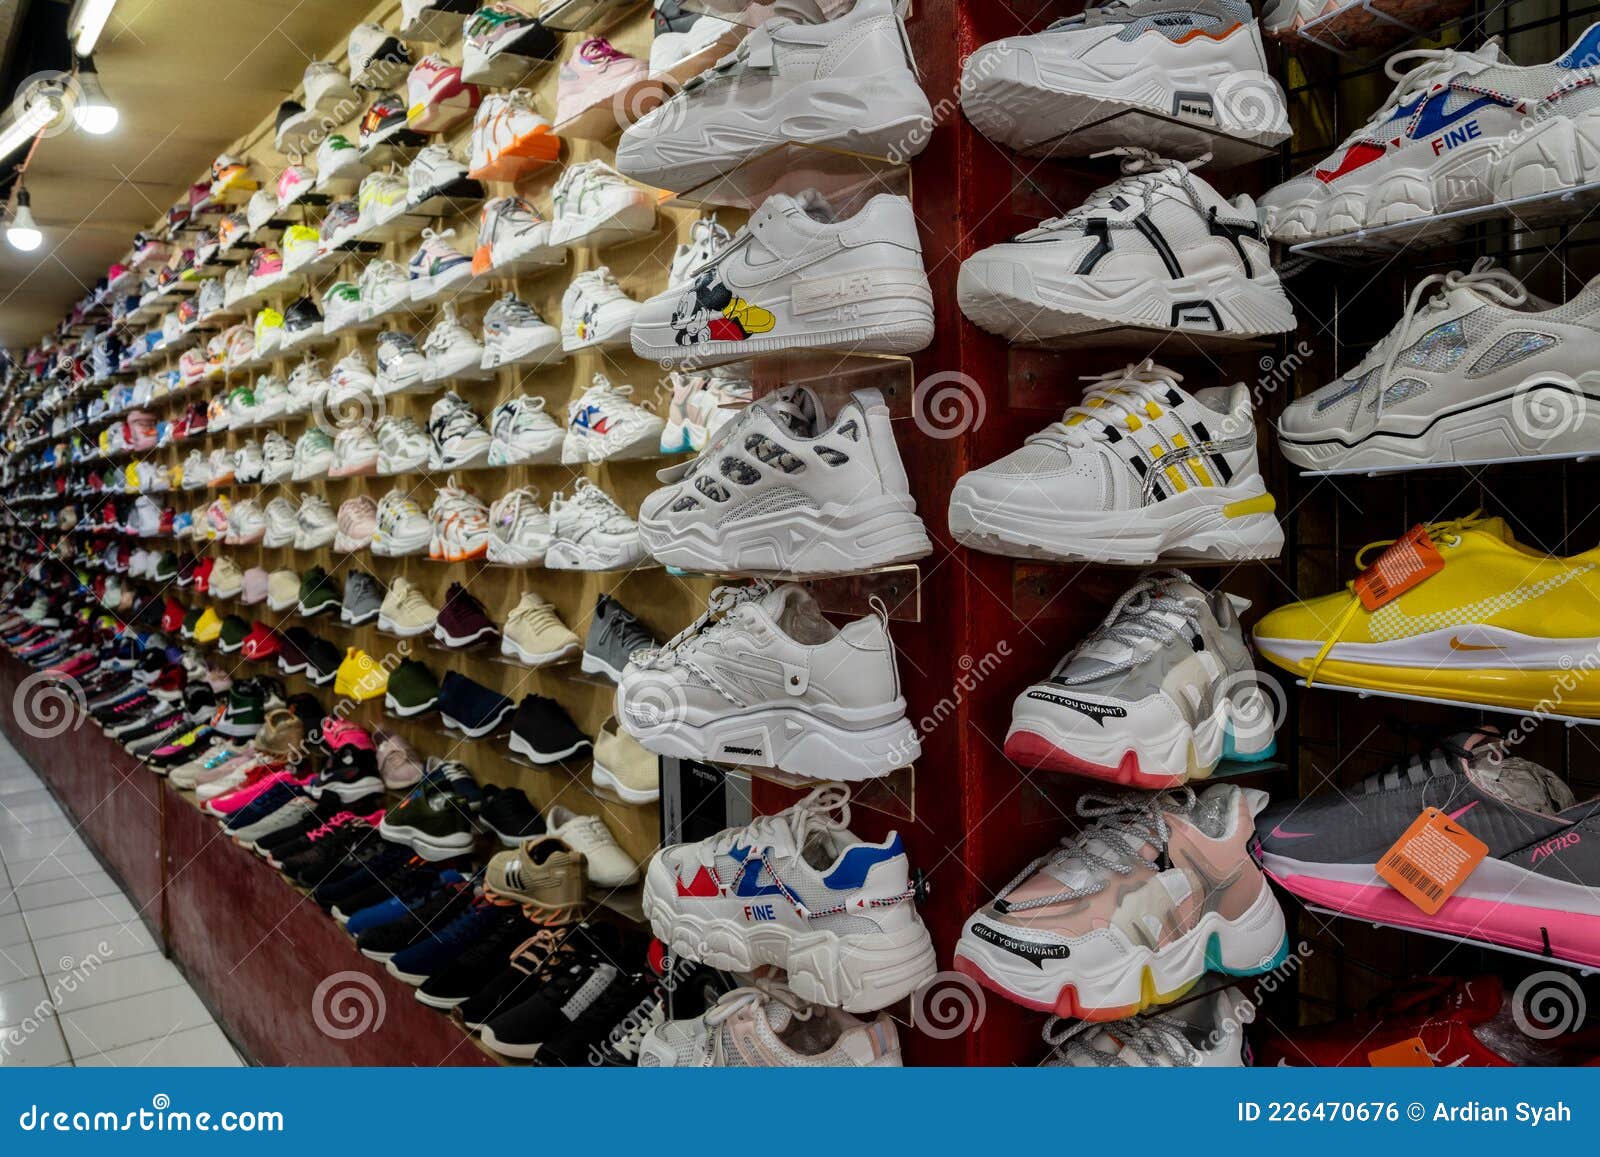 A Row of Sneakers at the Flea Market, in the Alun Alun Area, Bandung. Photo - Image of 226470676